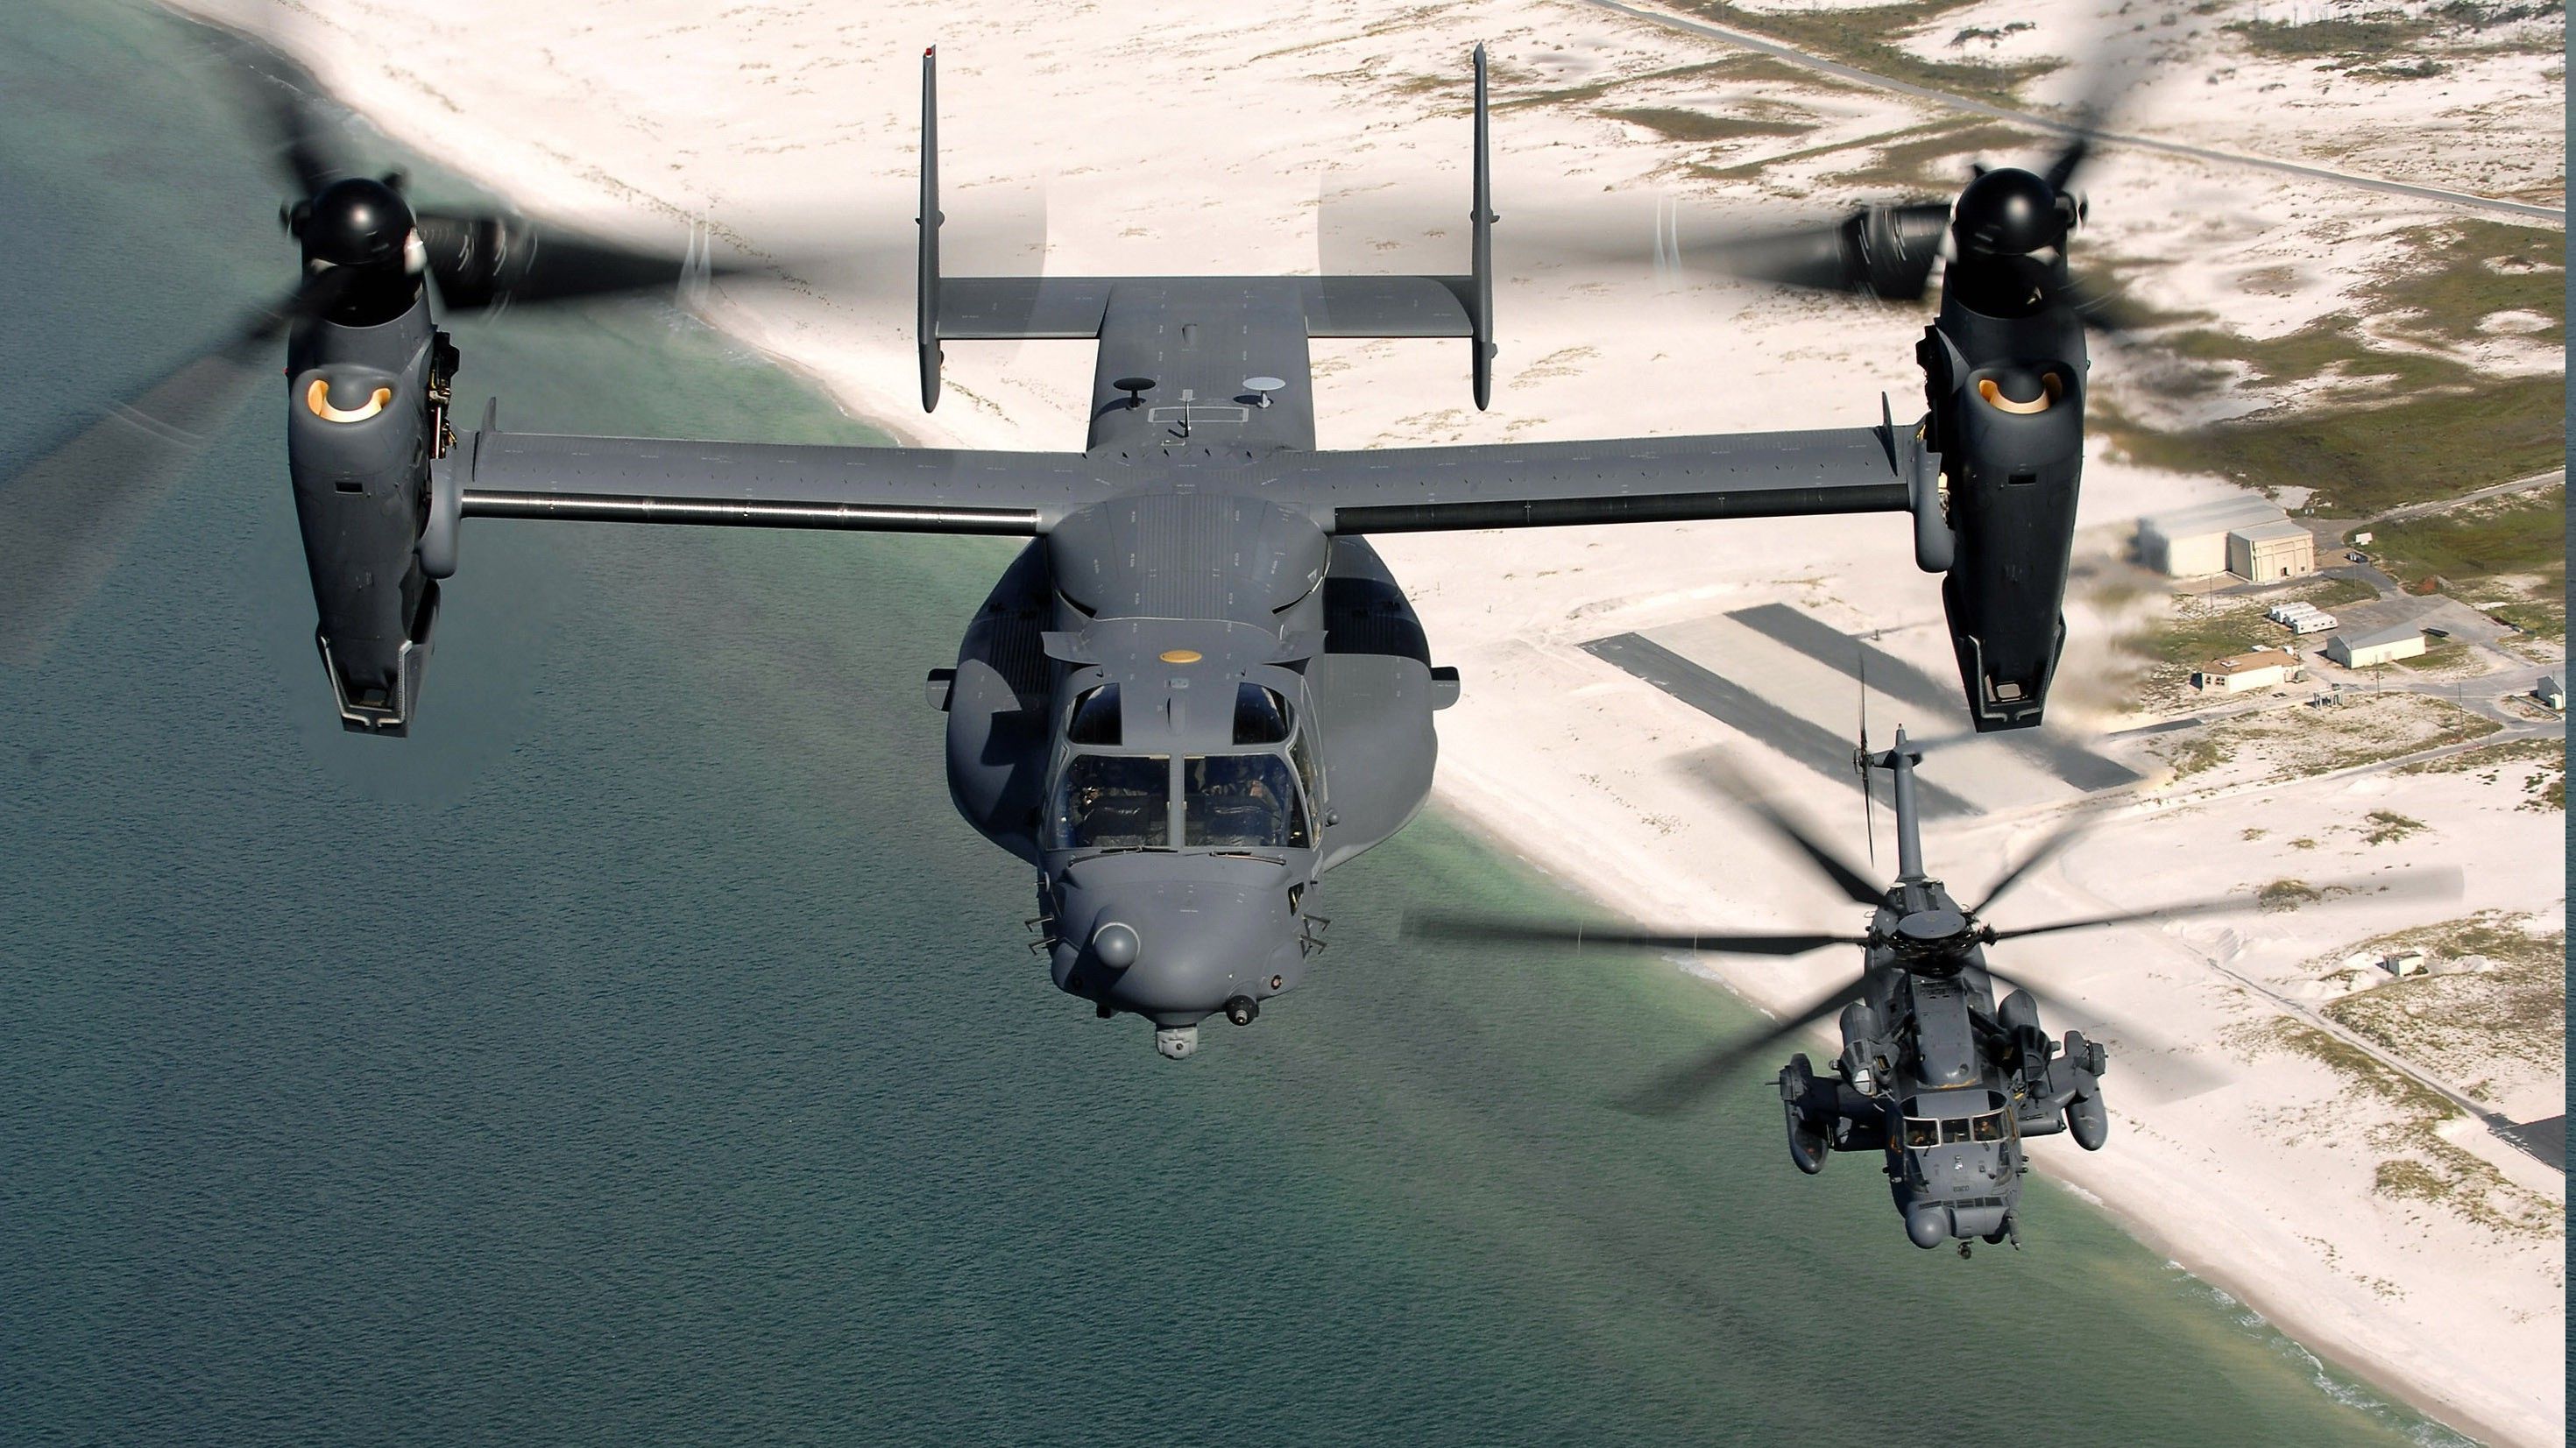 Wallpaper, airplane, military aircraft, air force, CV 22 Osprey, MH 53 Pave Low, aviation, aerospace engineering, helicopter rotor, rotorcraft, military helicopter, bell boeing v 22 osprey, tiltrotor, 2940x1653 px 2940x1653